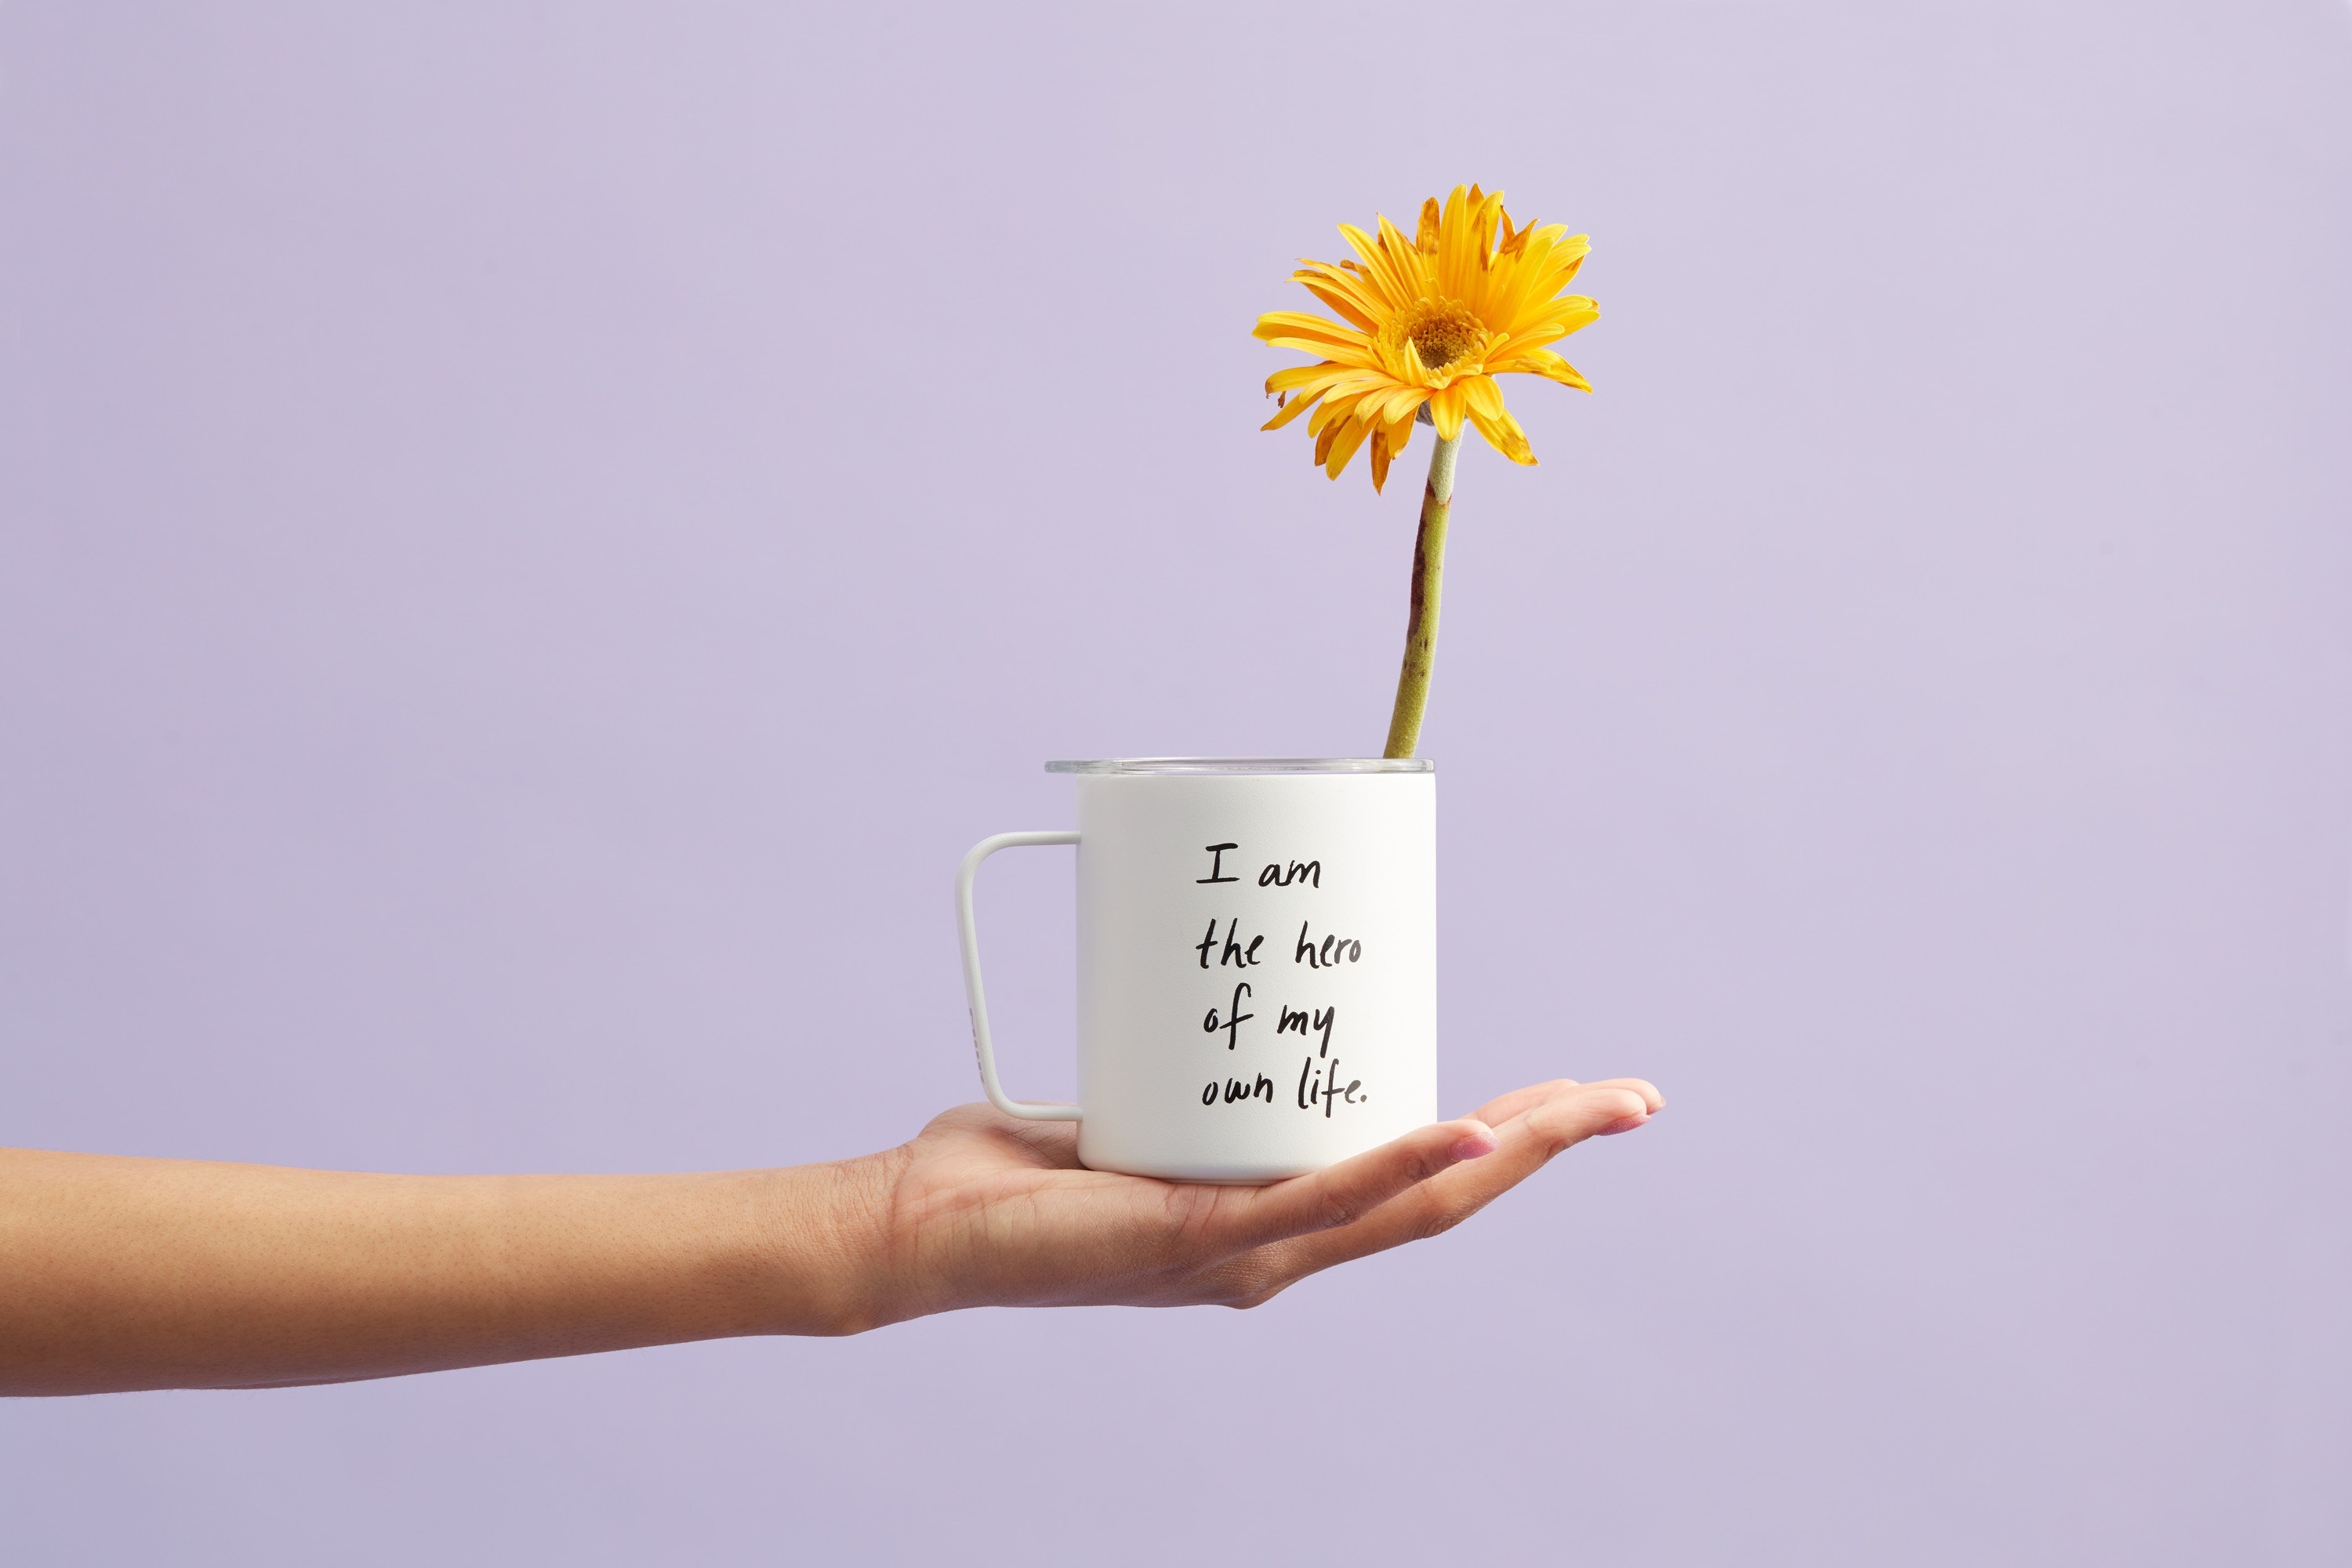 A yellow petaled flower in a white mug in front of a purple wall